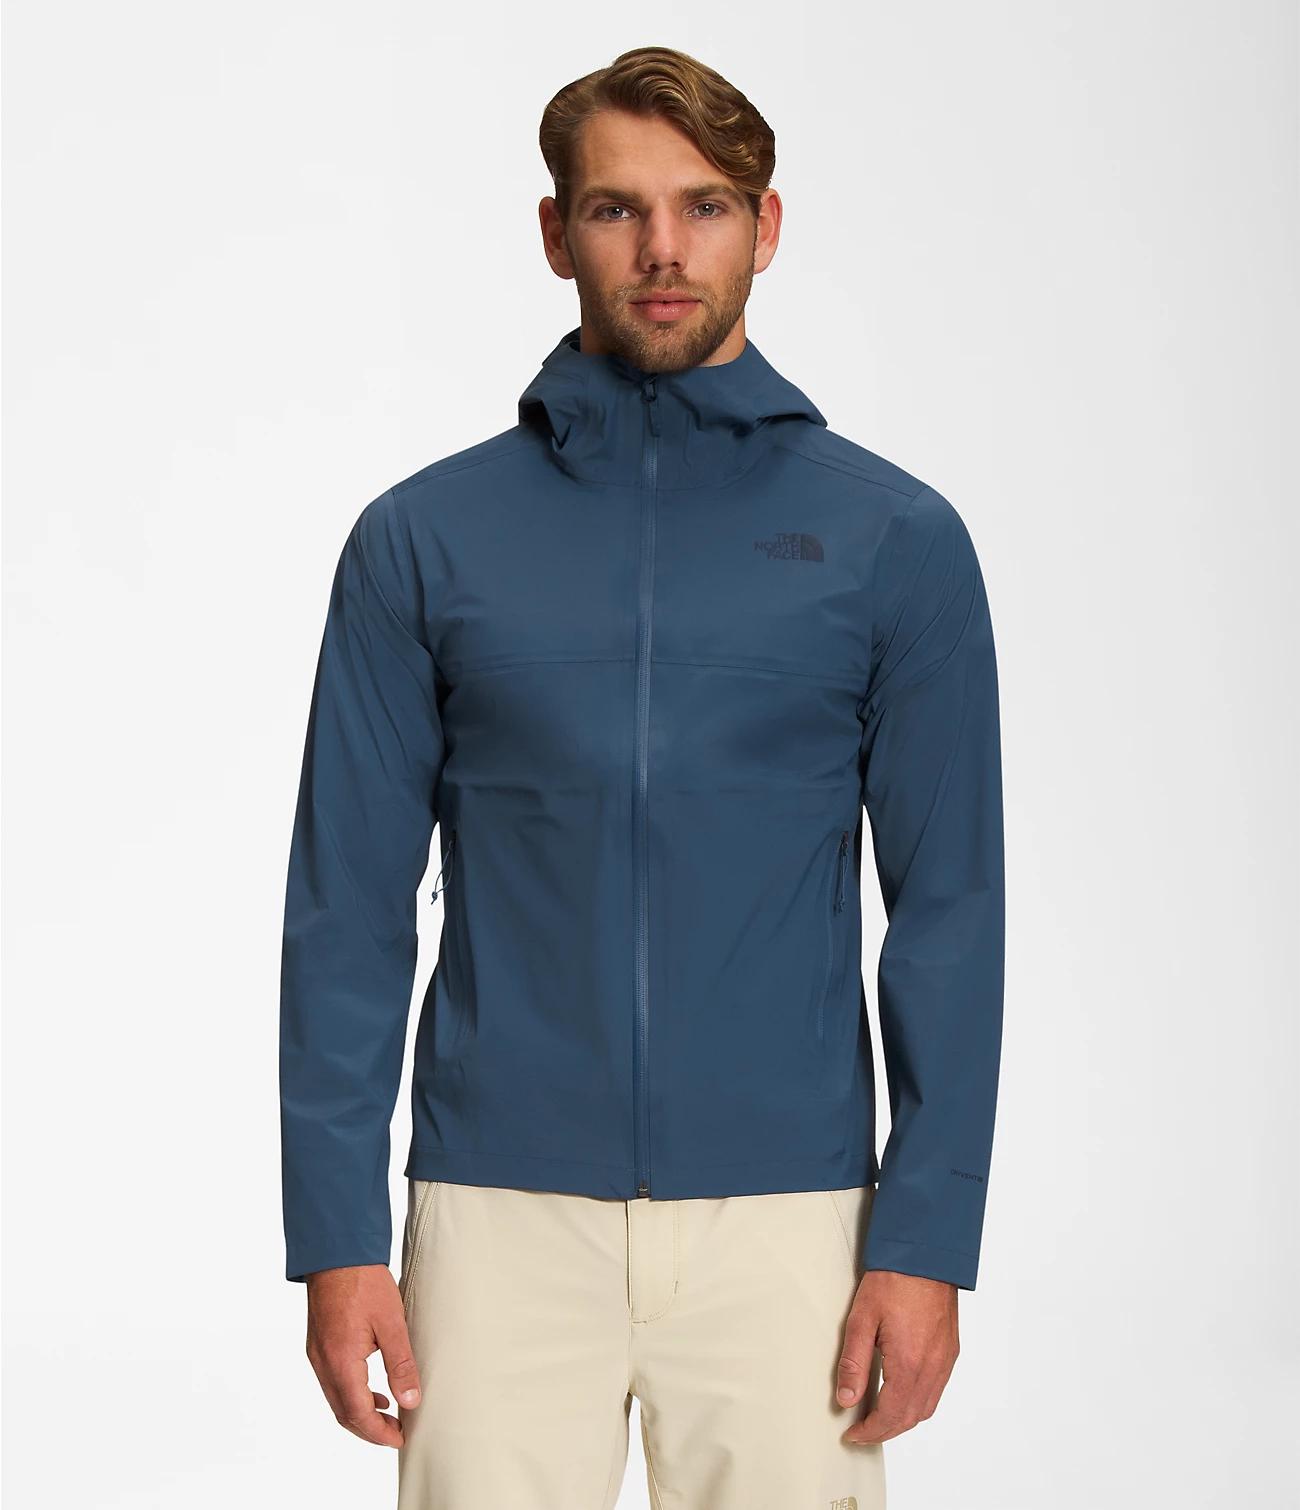 Men’s West Basin DryVent™ Jacket by THE NORTH FACE | jellibeans